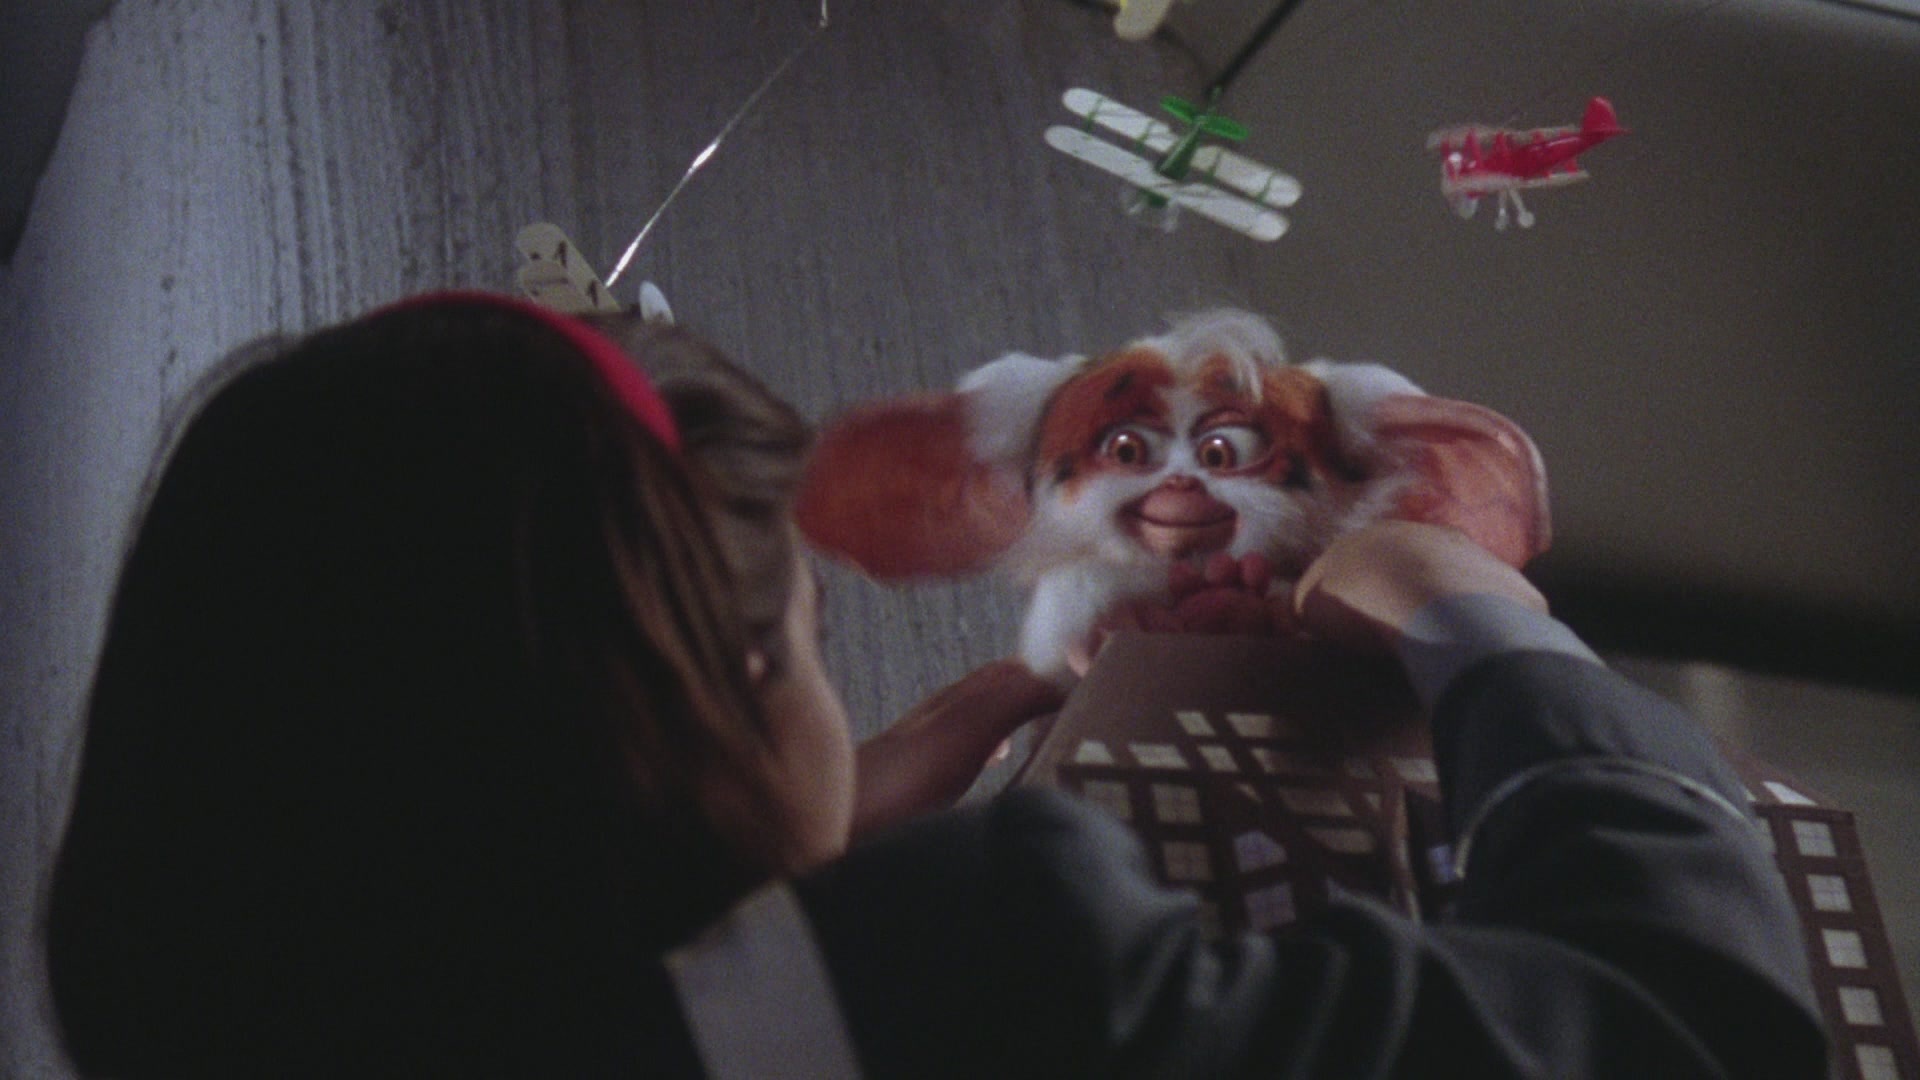 Gremlin Gizmo: Gremlins, A 1984 American black comedy horror film directed by Joe Dante and written by Chris Columbus. 1920x1080 Full HD Wallpaper.